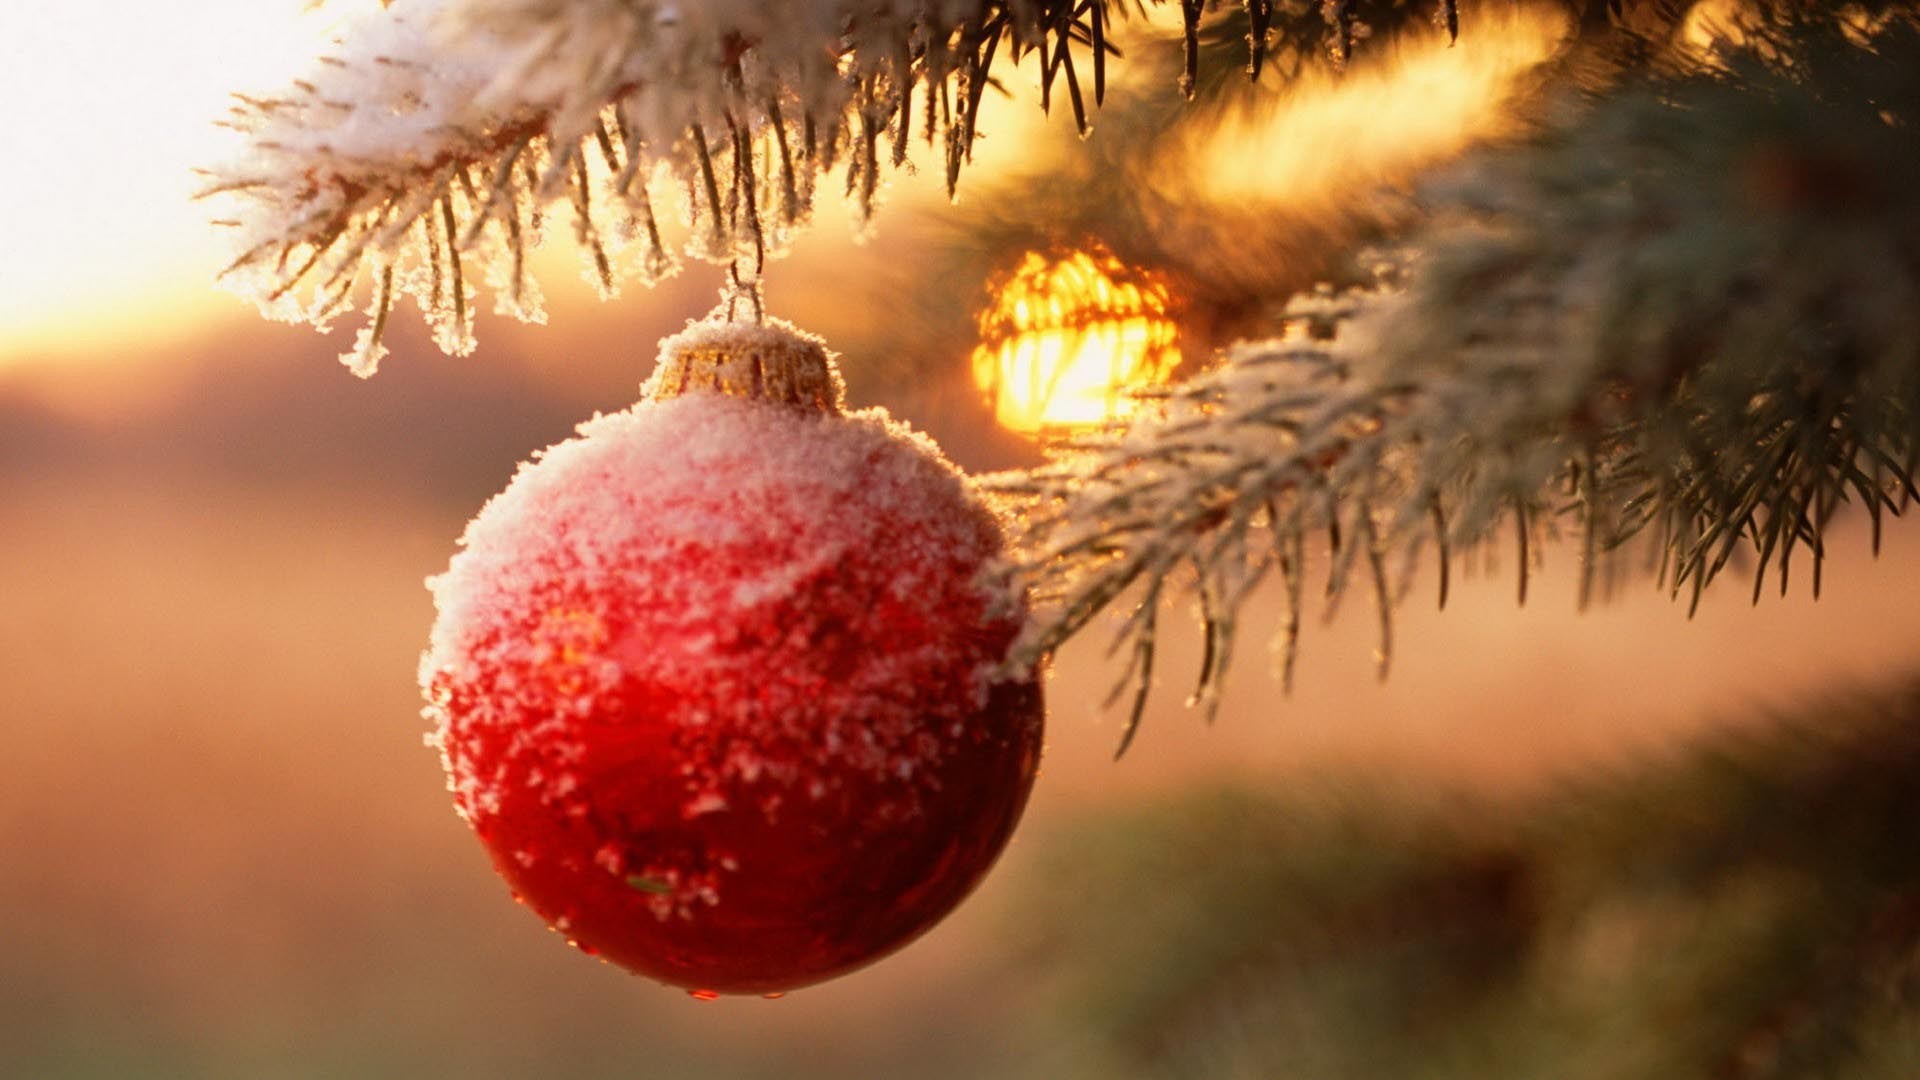 Christmas wallpaper Tumblr ·① Download free amazing wallpapers for